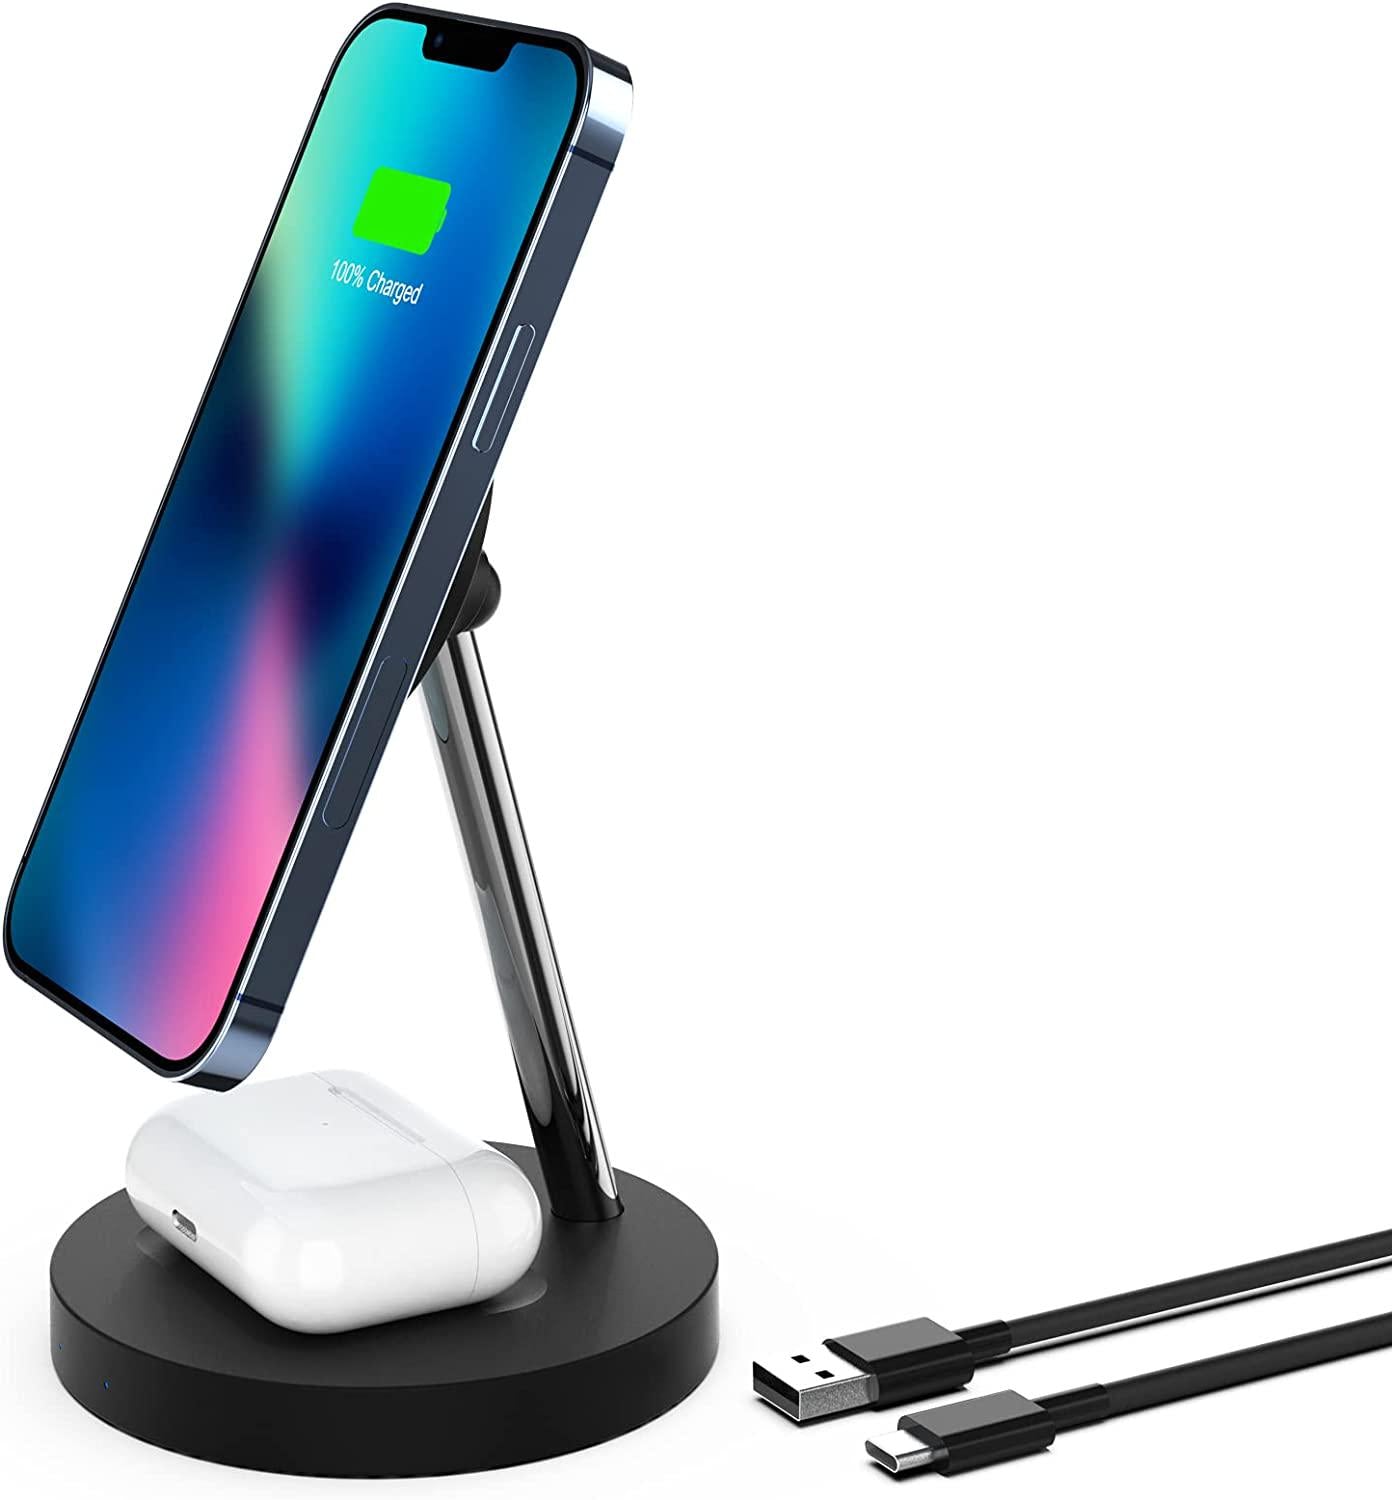 Boaraino, Magnetic Wireless Charger, Boaraino 2 in 1 Wireless Charging Station Compatible with iPhone 13/13 Pro/13 Pro Max/13 Mini/iPhone 12/12 Pro/12 Pro Max/12 Mini, AirPods 2/3/Pro (Adapter Not Included)